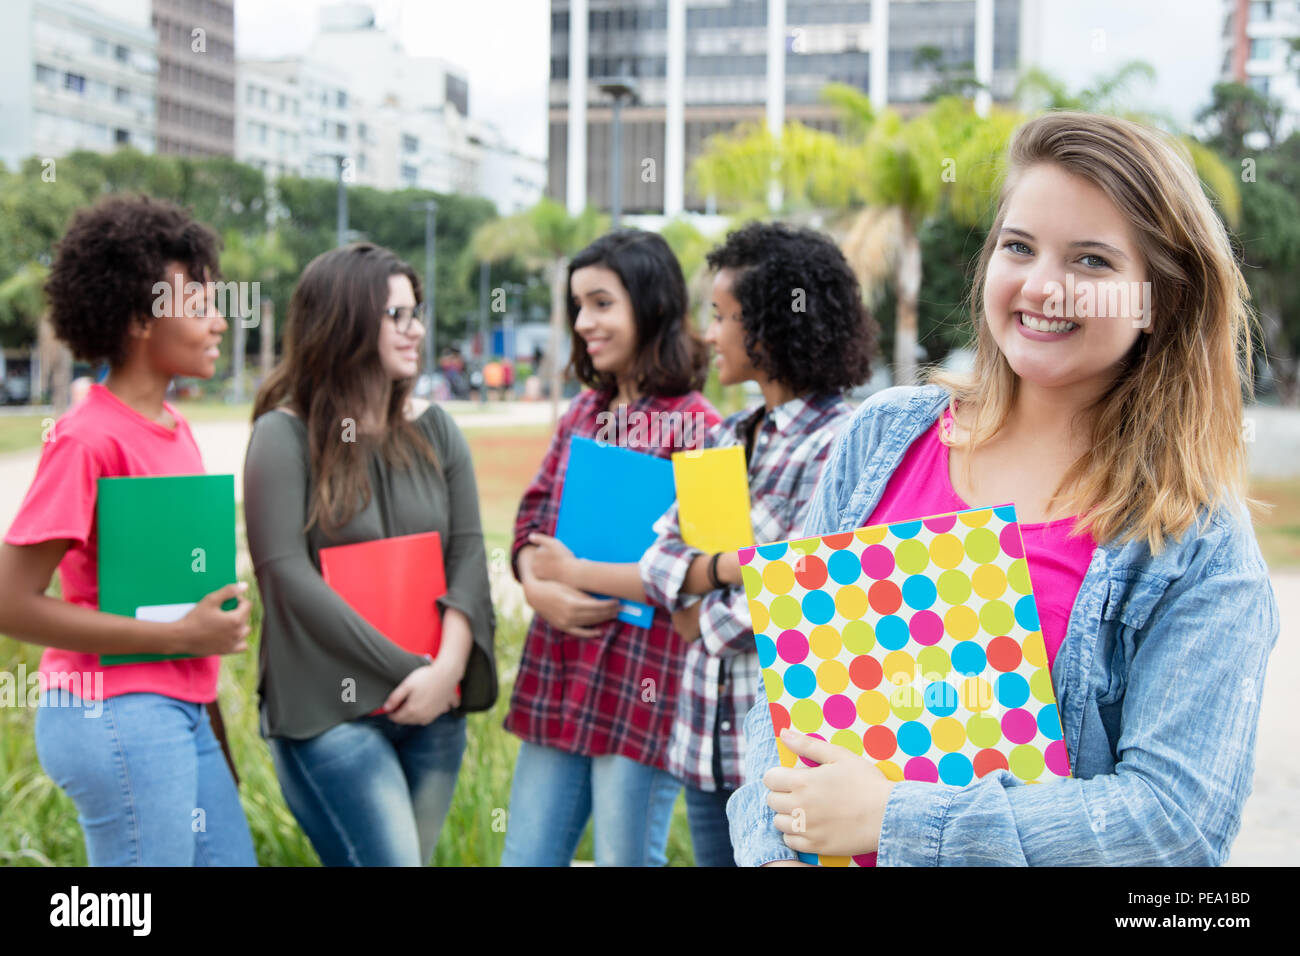 Caucasian female student with group of international students outdoors on campus of university Stock Photo